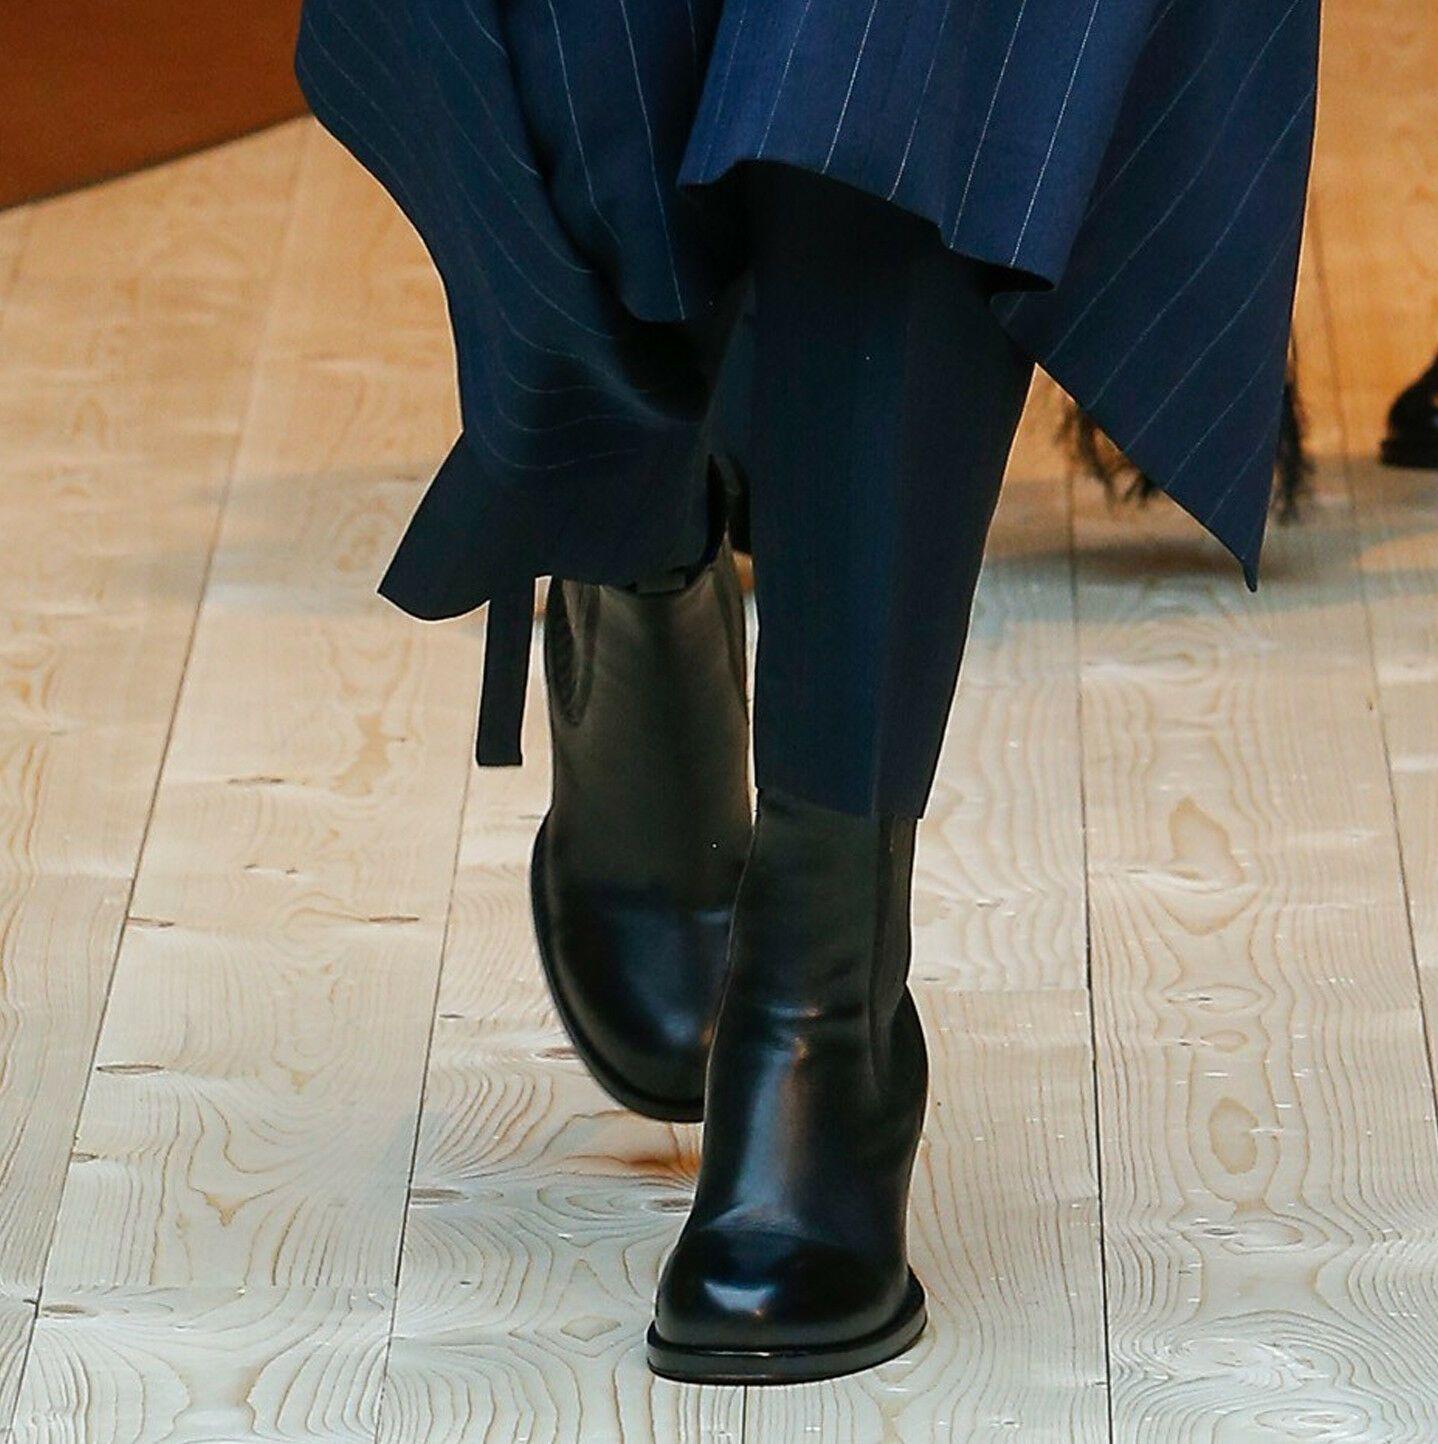 new CELINE PHILO runway 2017 black round toe high heel cowboy sock boot EU38 US8
CELINE
FROM THE FALL WINTER 2017 RUNWAY
Black calf leather upper. Round toe. 
Elasticated gauset on outer and inner edge. 
Round curved heel. Pull tab at front and back